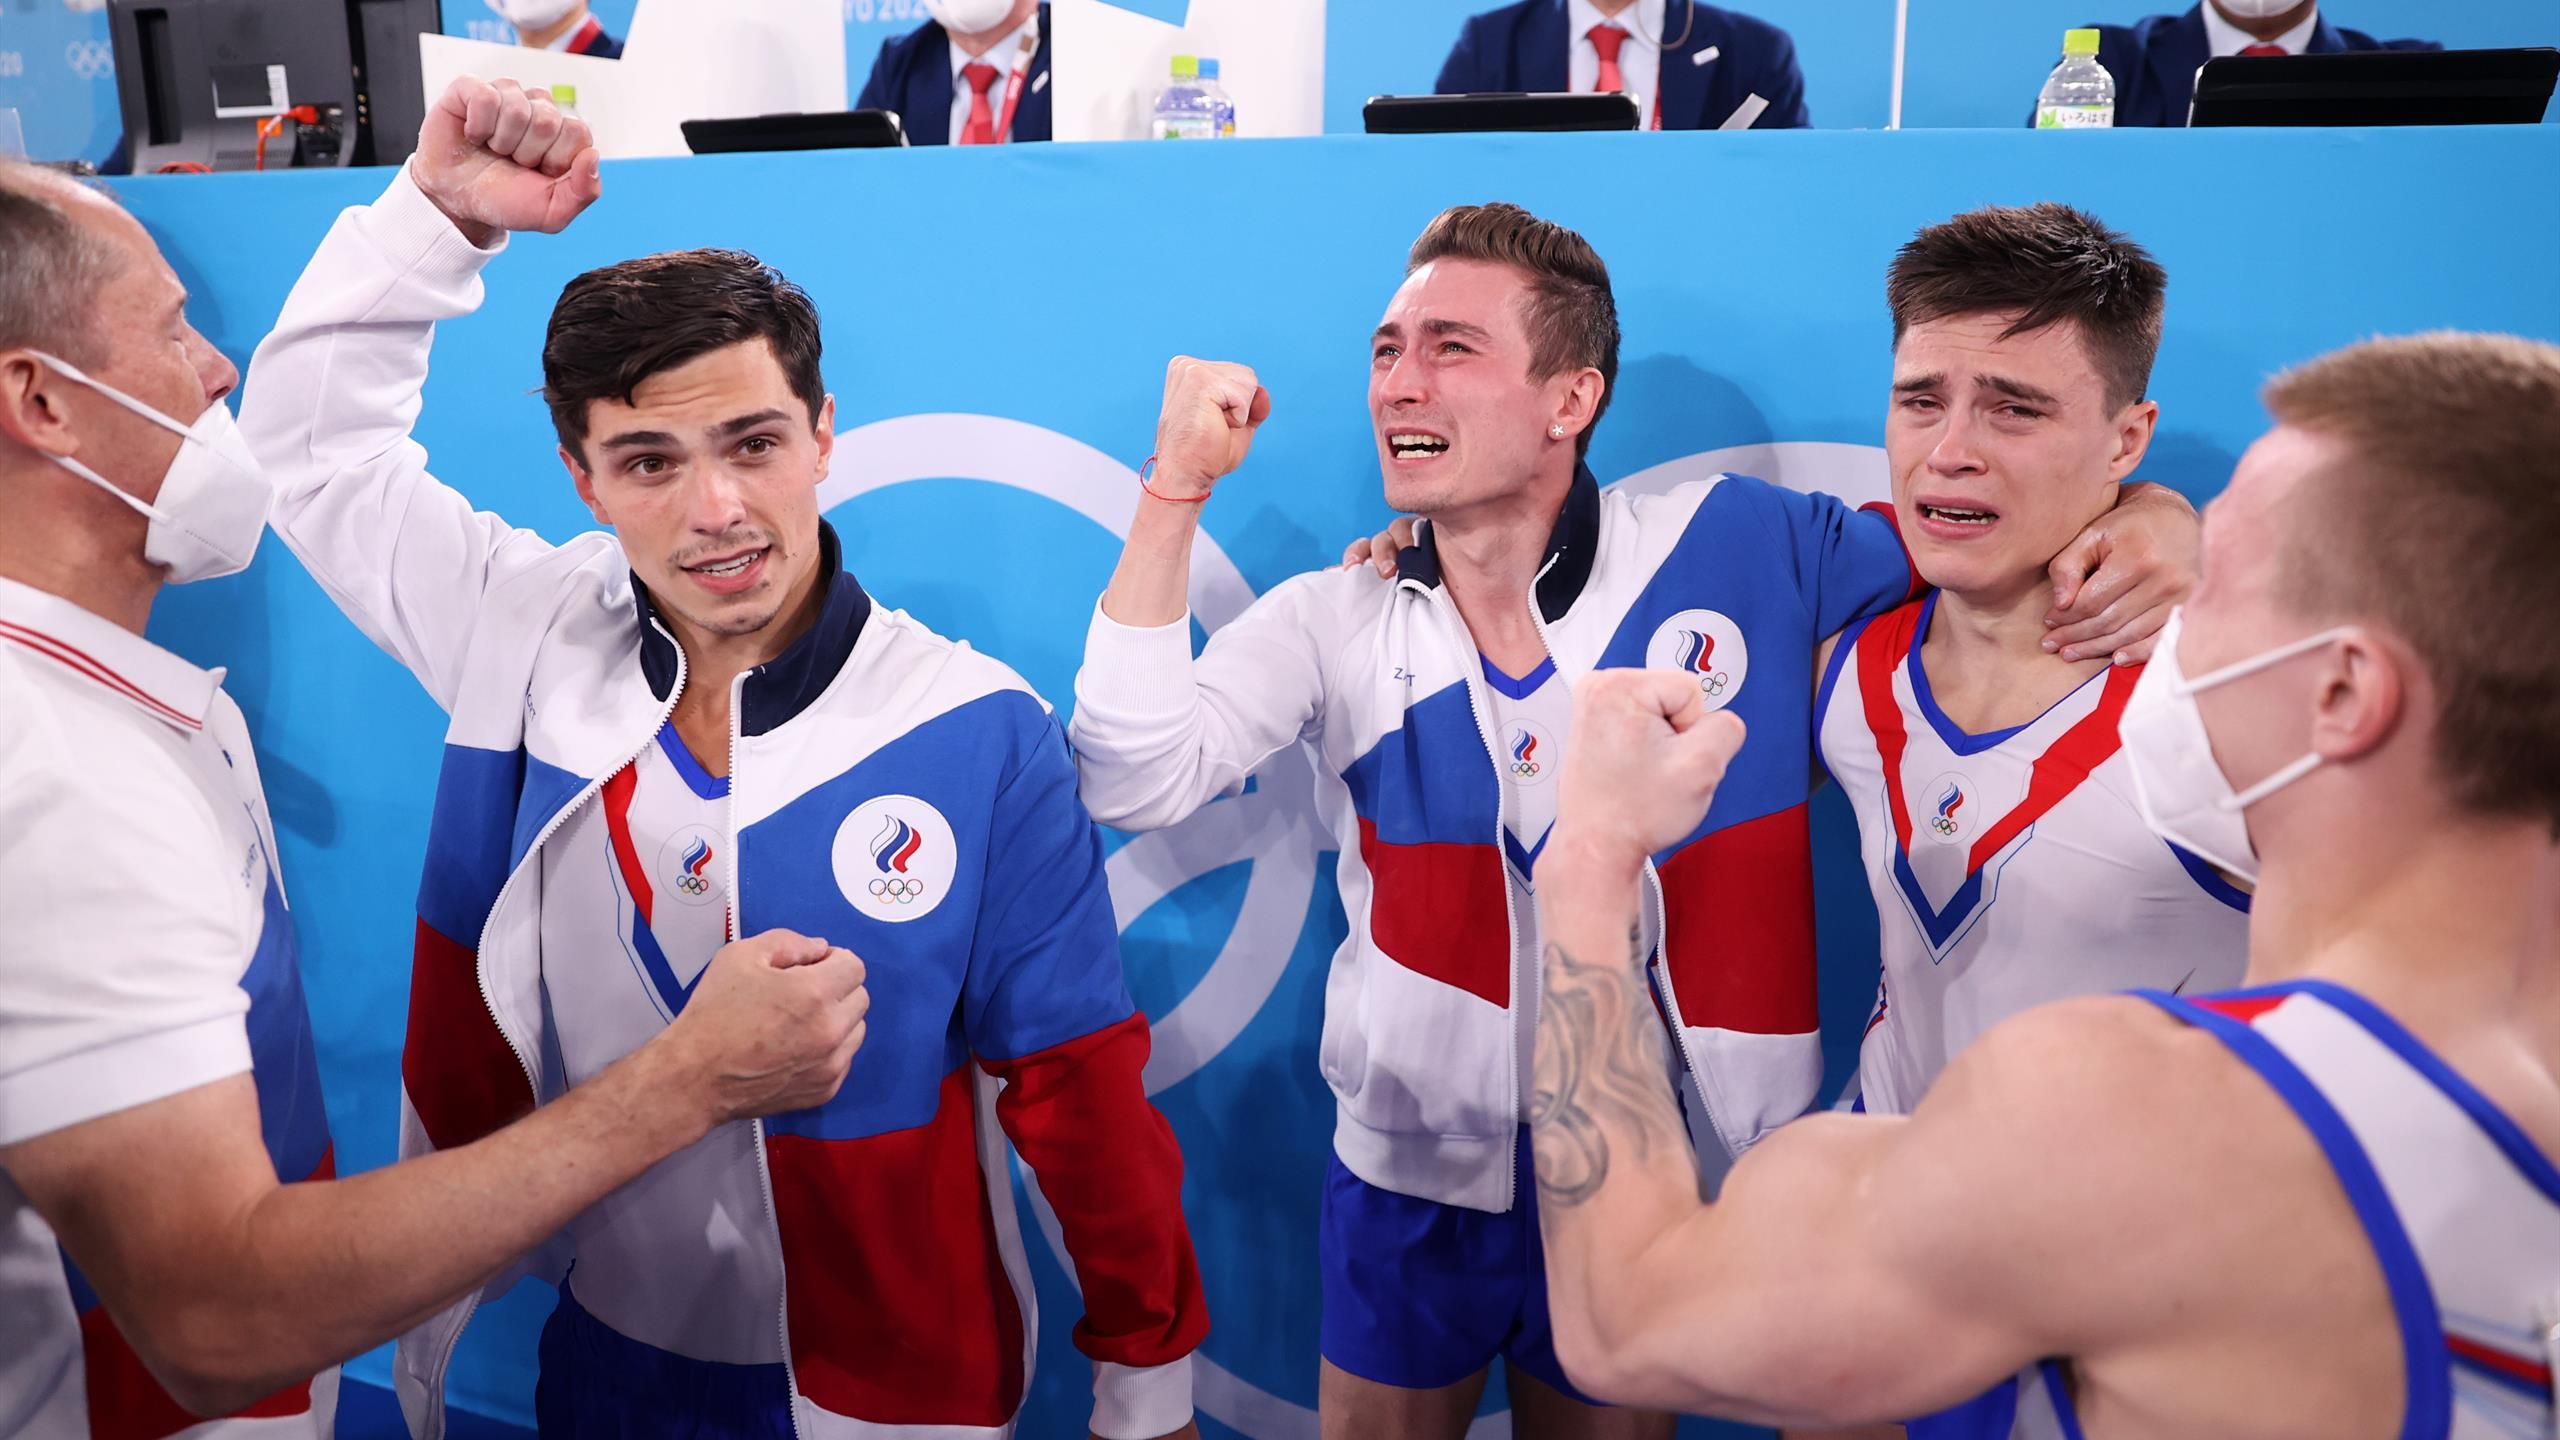 Tokyo Russia Edge Japan By A Fraction To Win First Men S Team Gymnastics Gold Since 1996 Eurosport